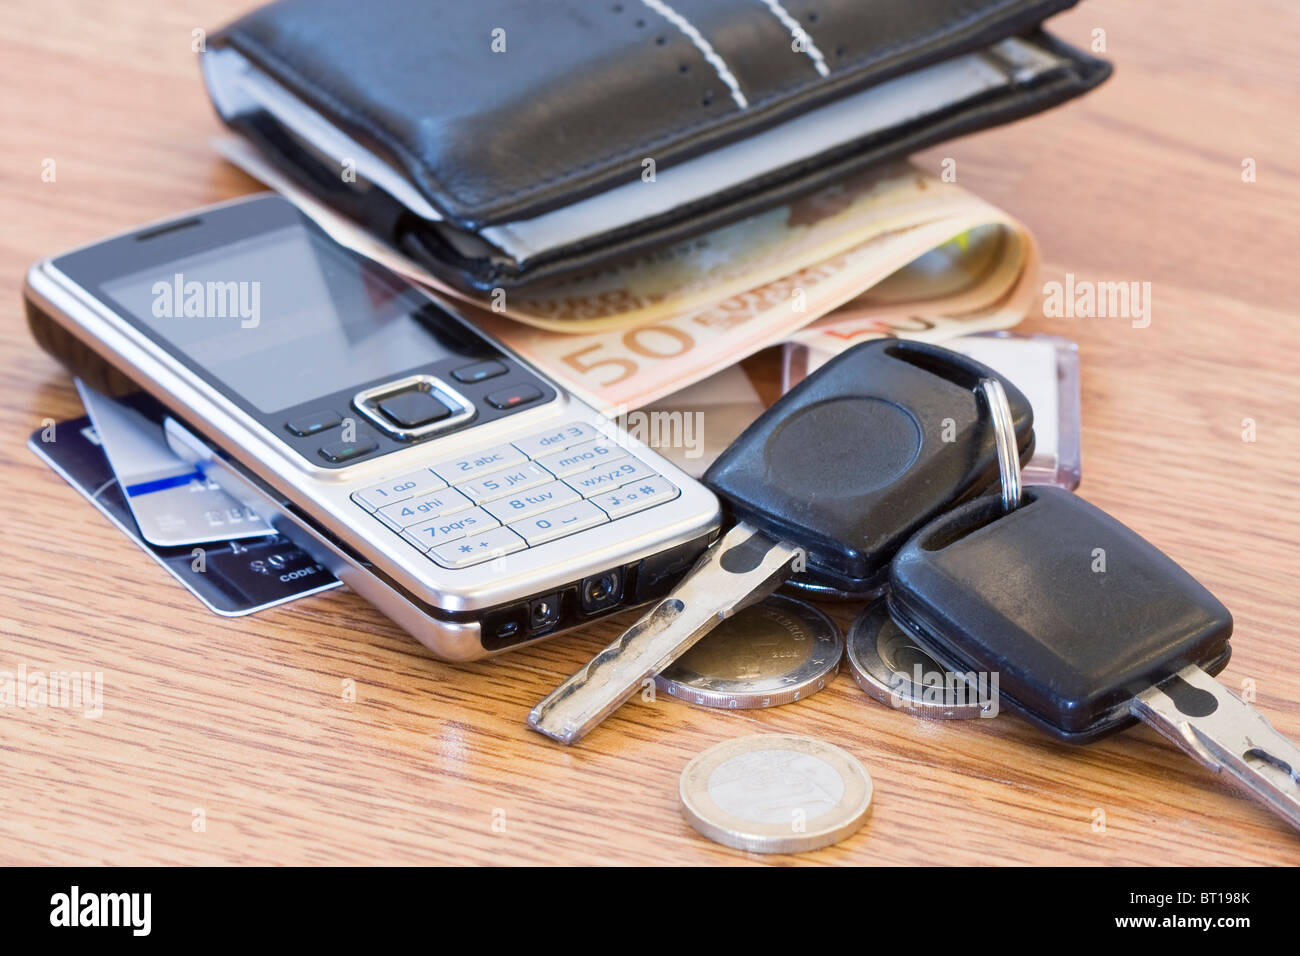 Mans wallet, change phone and car keys on the table Stock Photo